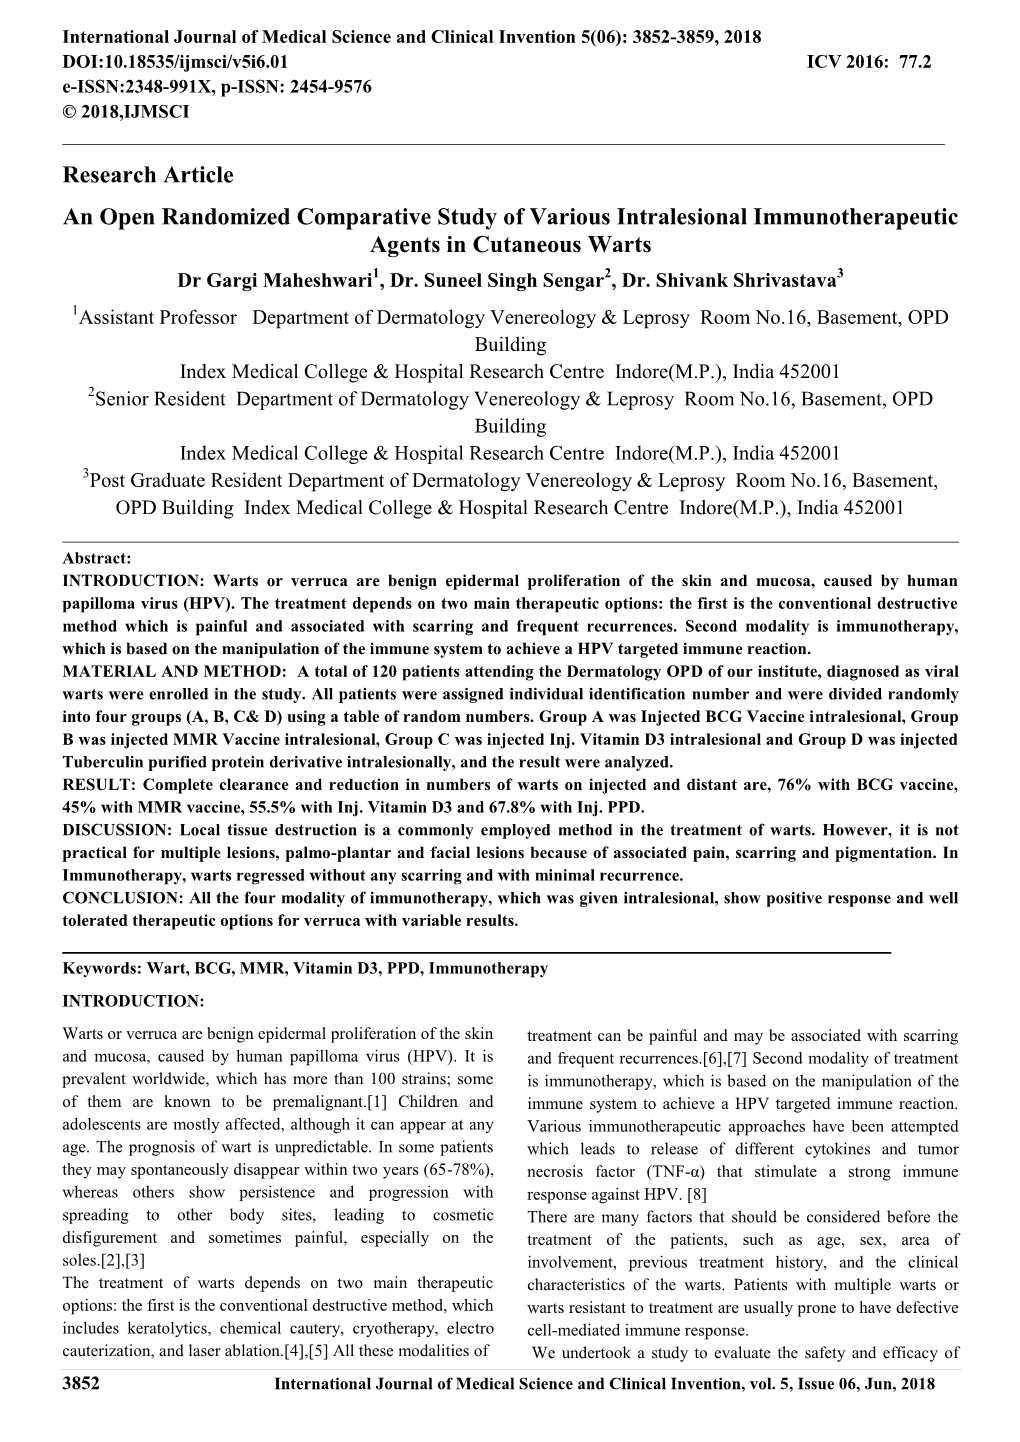 Research Article an Open Randomized Comparative Study of Various Intralesional Immunotherapeutic Agents in Cutaneous Warts Dr Gargi Maheshwari1, Dr